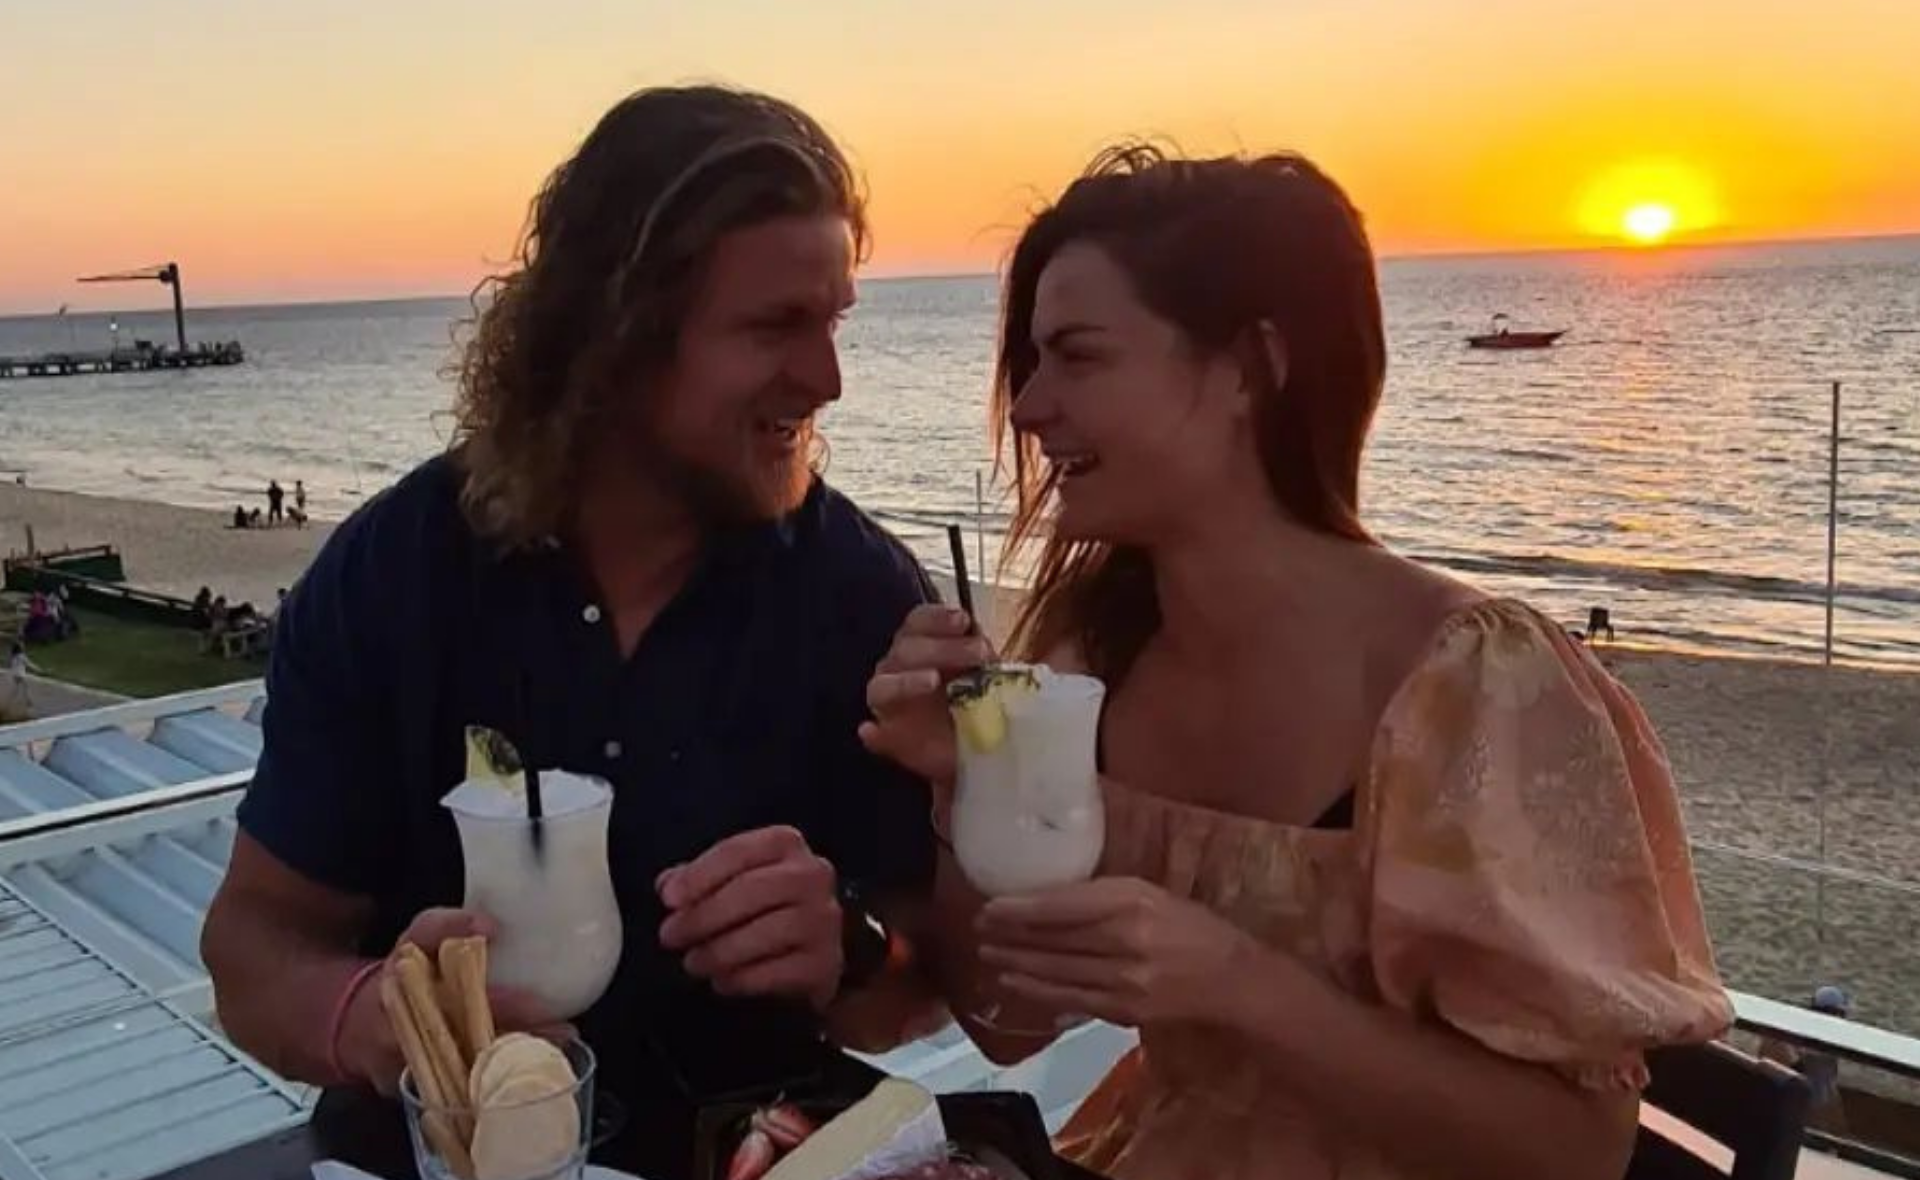 “Little badger cub.” Former Bachelor Nick Cummins is having a baby with his girlfriend, Alexandra George